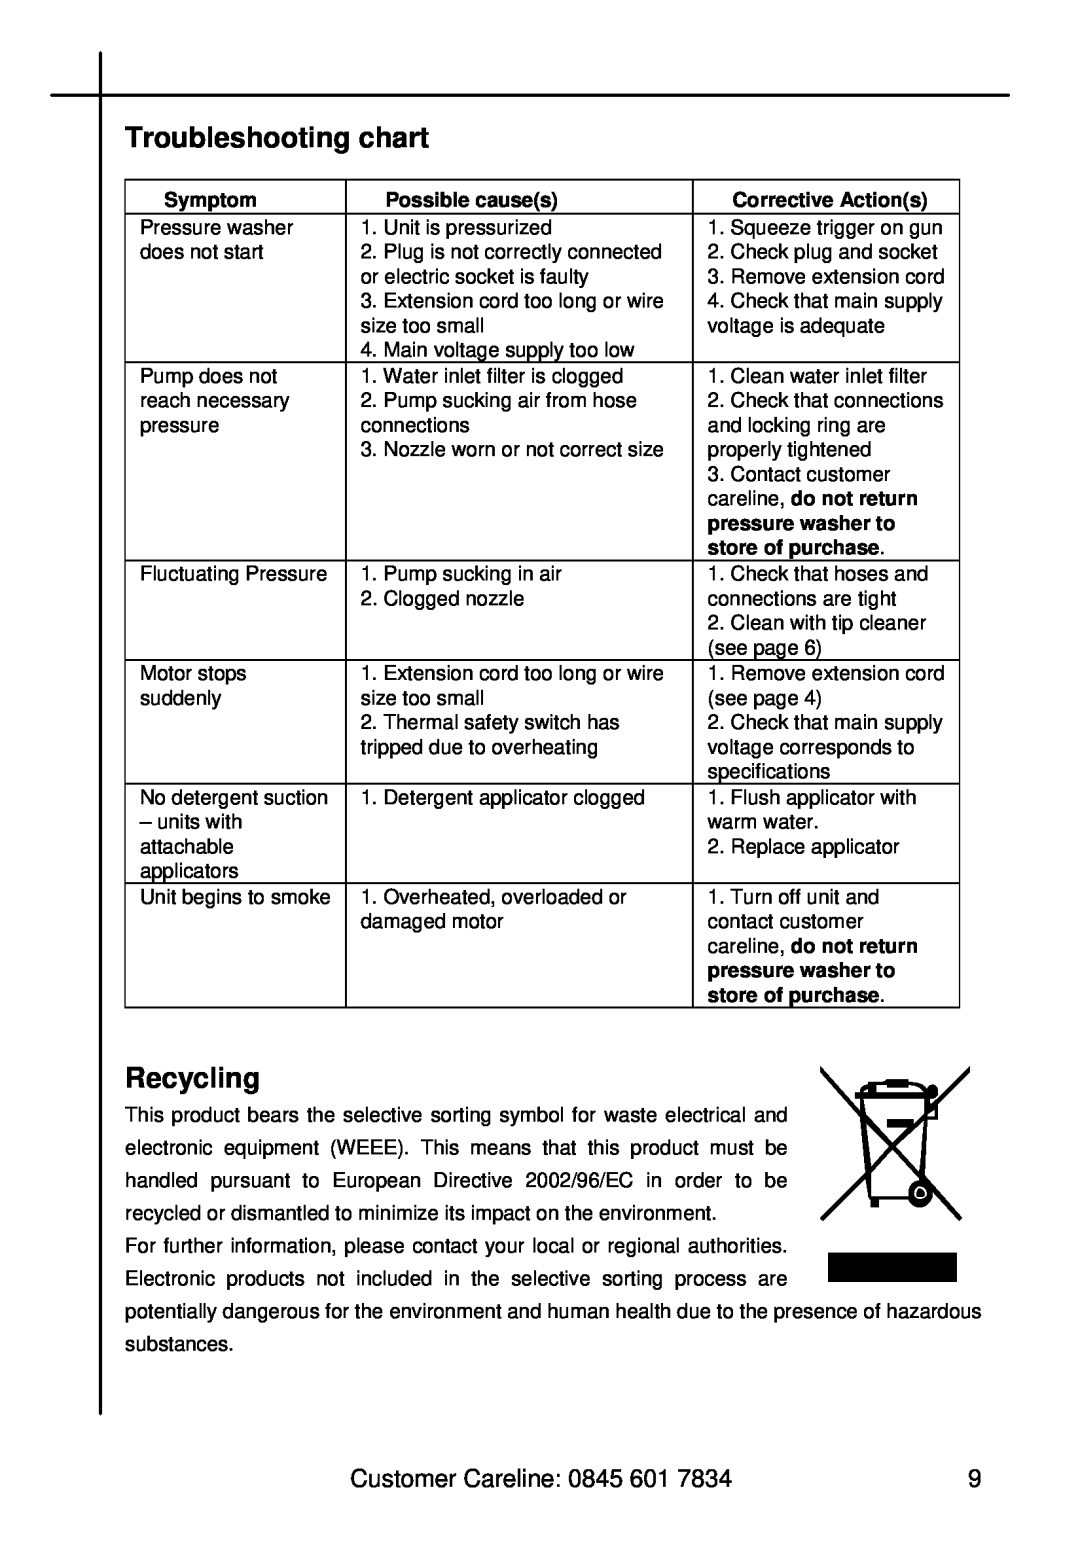 Halfords HP 1400 Troubleshooting chart, Recycling, Symptom, Possible causes, Corrective Actions, careline, do not return 